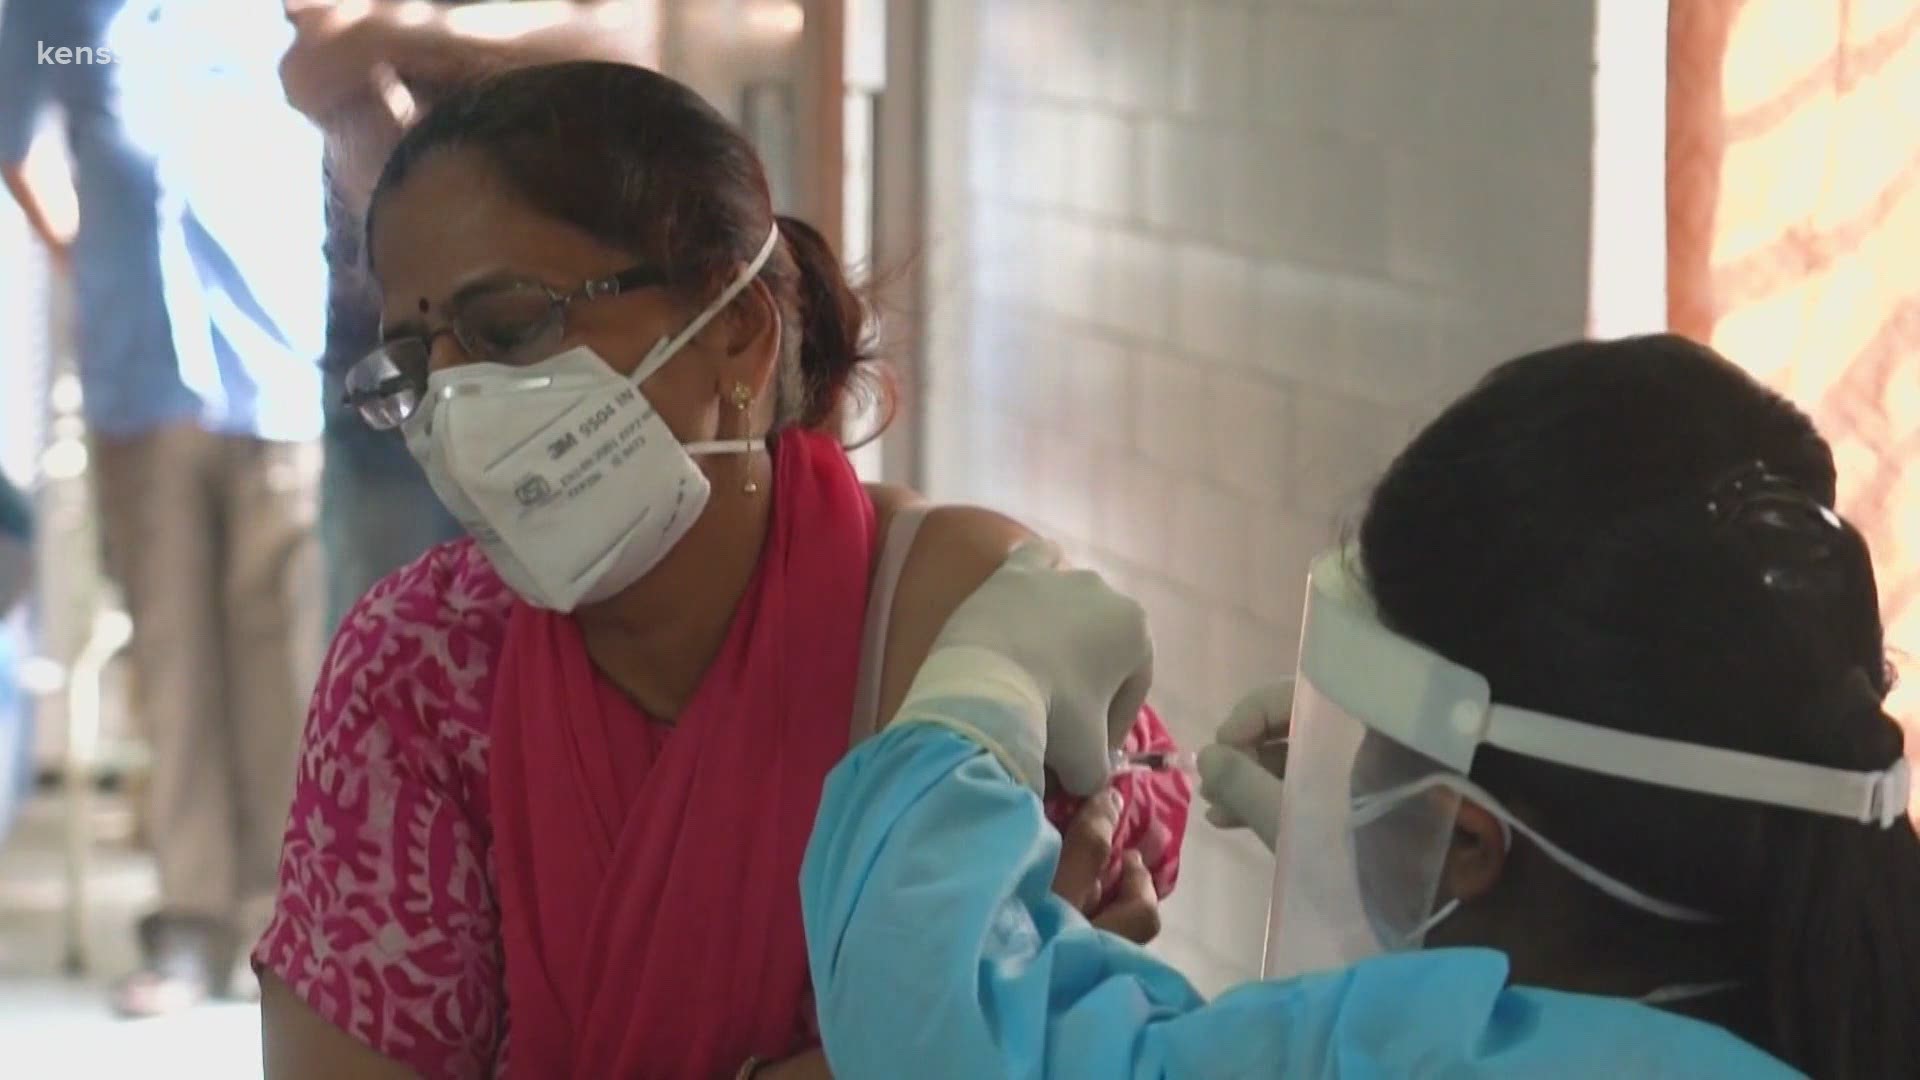 India reported a record-breaking 400,000 new coronavirus cases in one day.